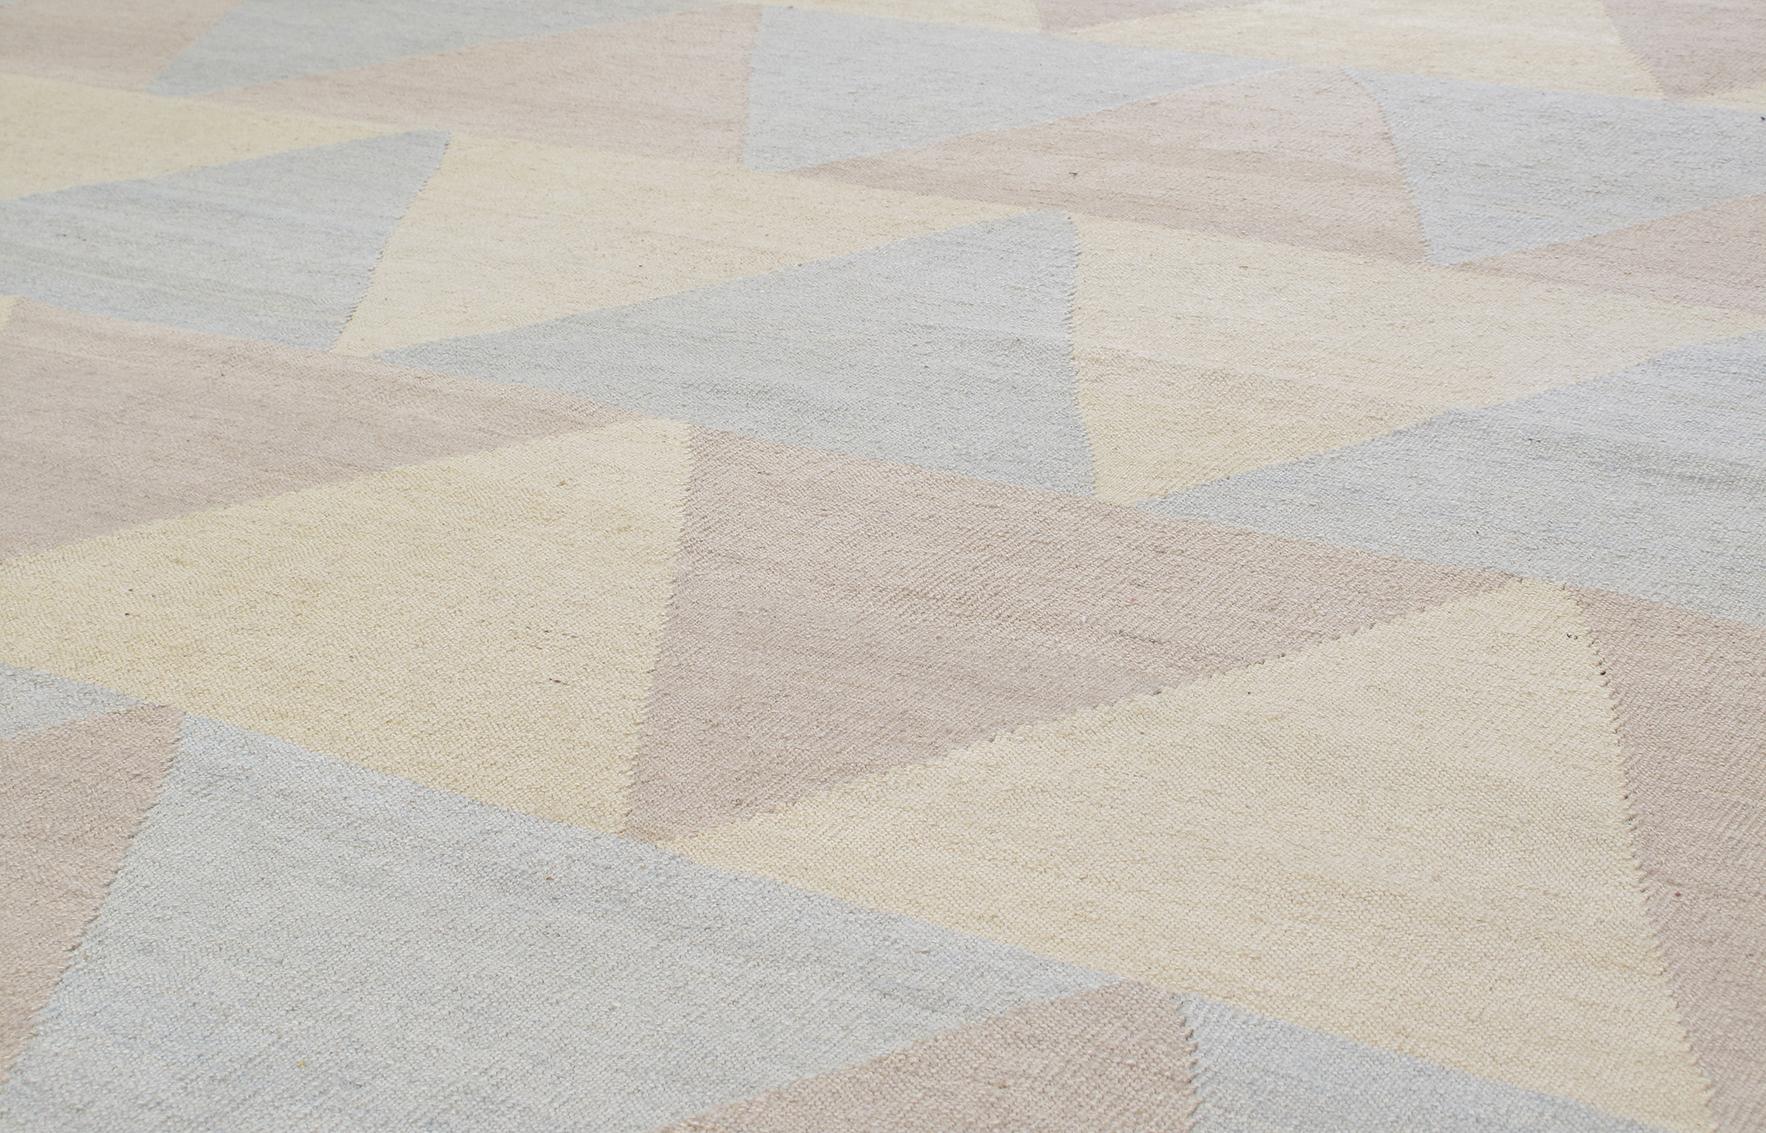 This modern flat-weave rug is made with handspun (wool or wool and cotton) and natural dyes. It features chevron-like design in soft, pastel color tones of sand, blue, and yellow. It is inspired by the vintage kilims that are native to the Shiraz